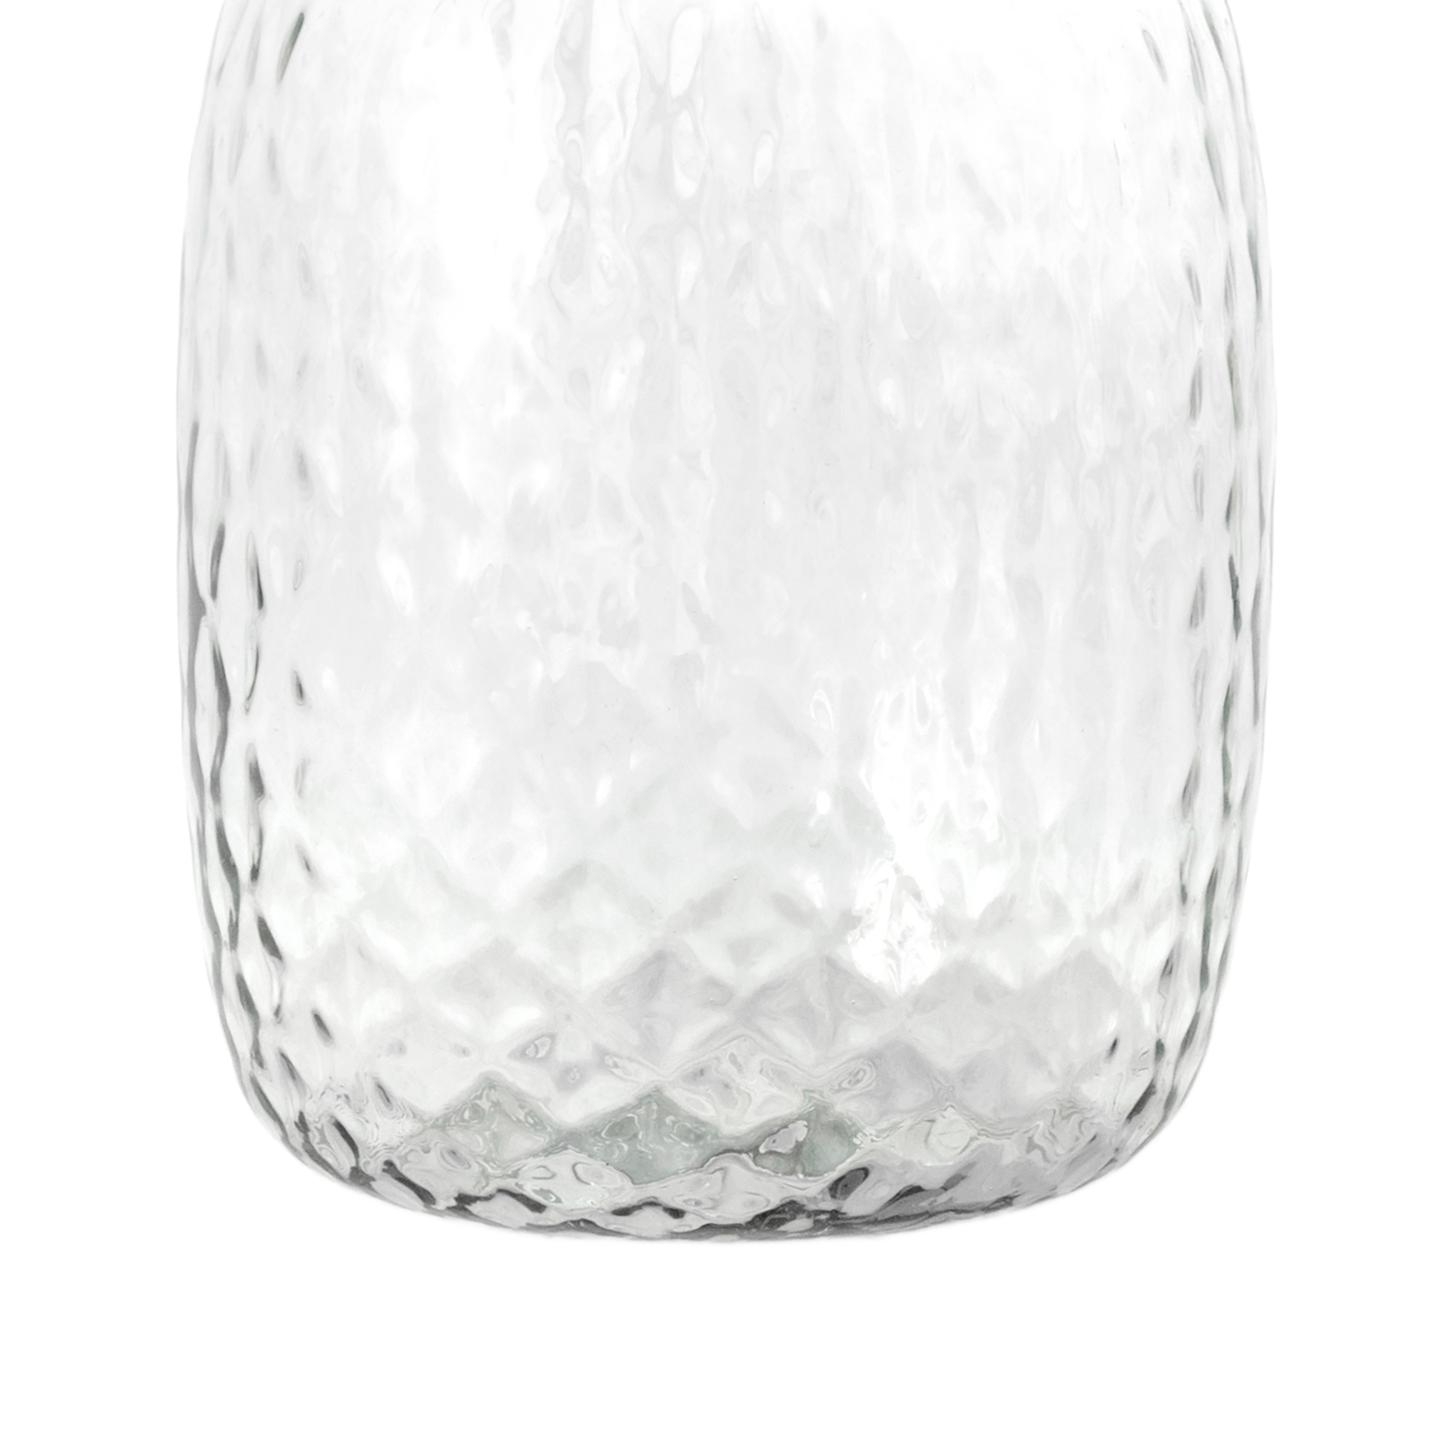 Haines Glass Table Lamp, 20" - Image 3